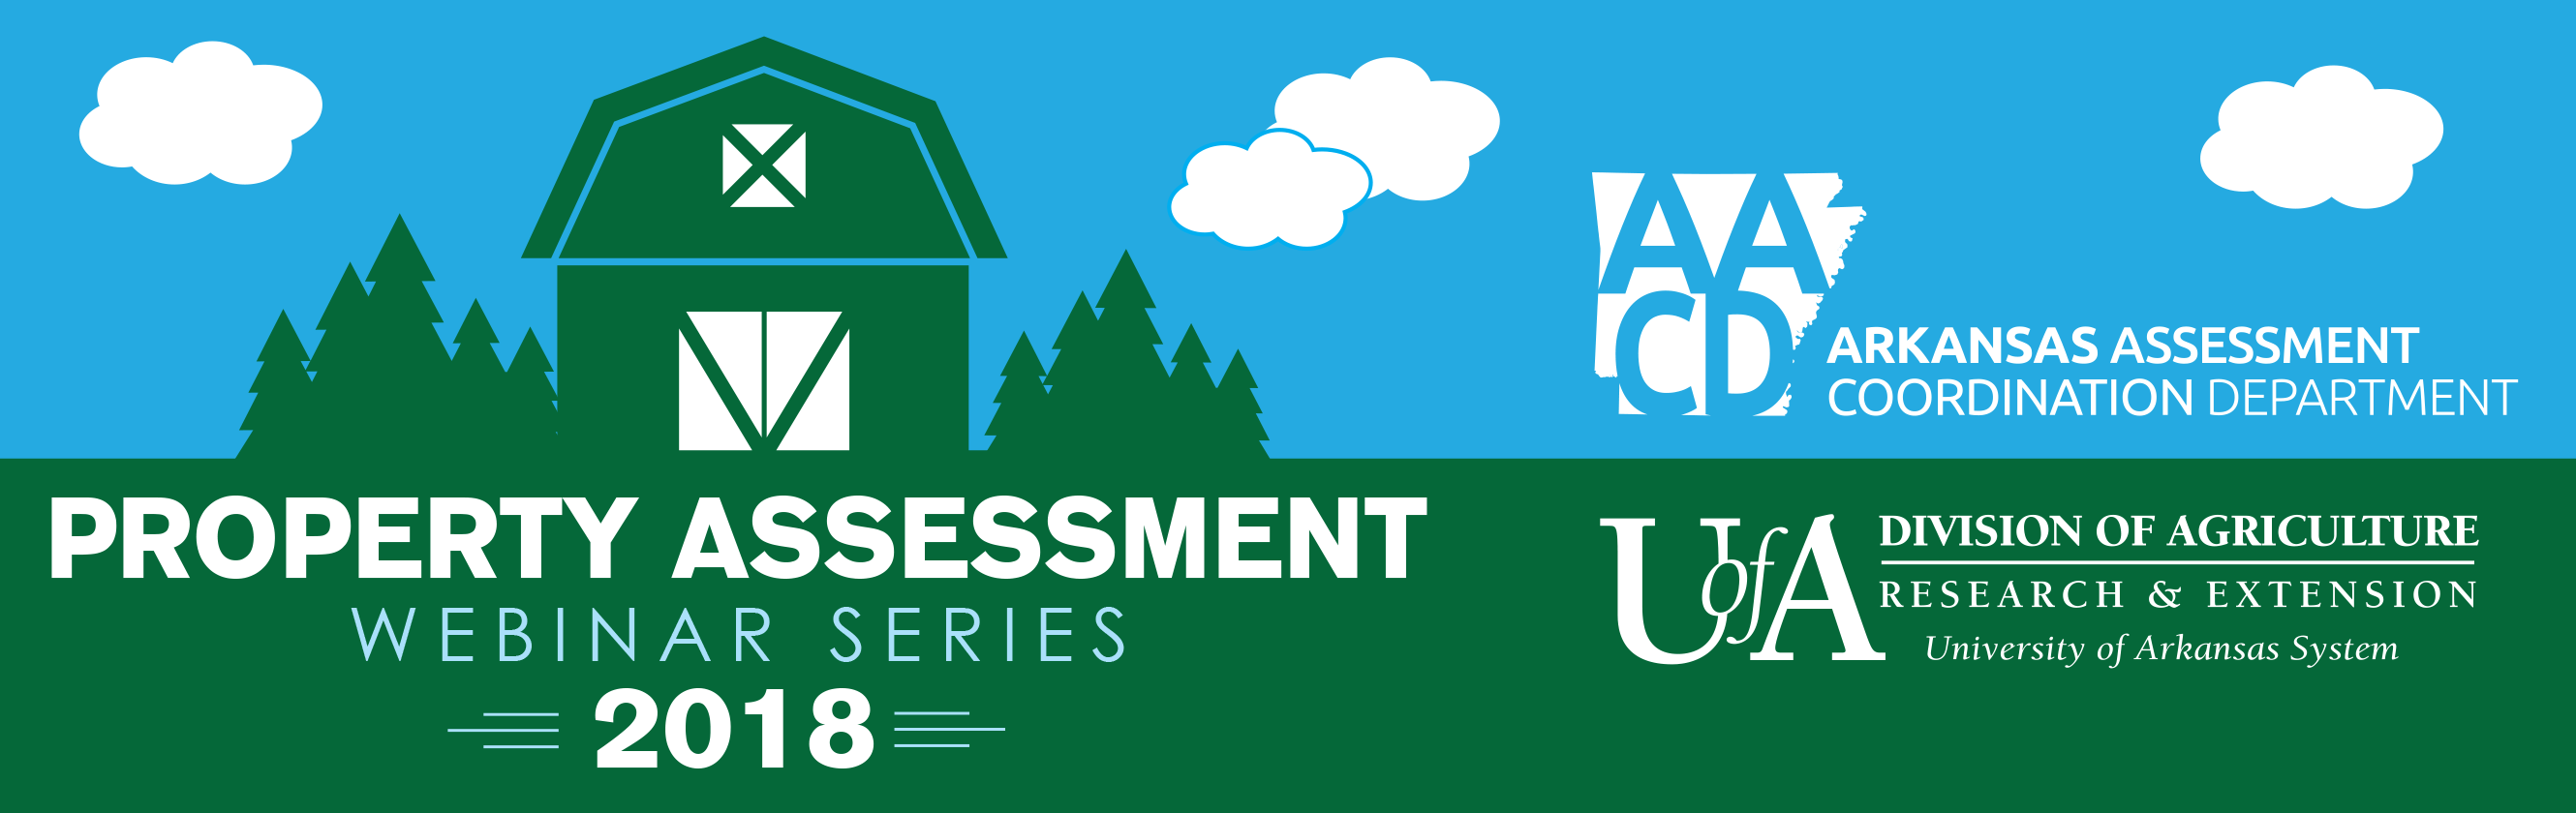 Image with a green and white silhouette of a barn and pine trees with a blue and white background of sky and clouds.  The graphic includes the Arkansas Assessment Coordination Department and UAEX logos, and the text "Property Assessment Webinar Series - 2018".